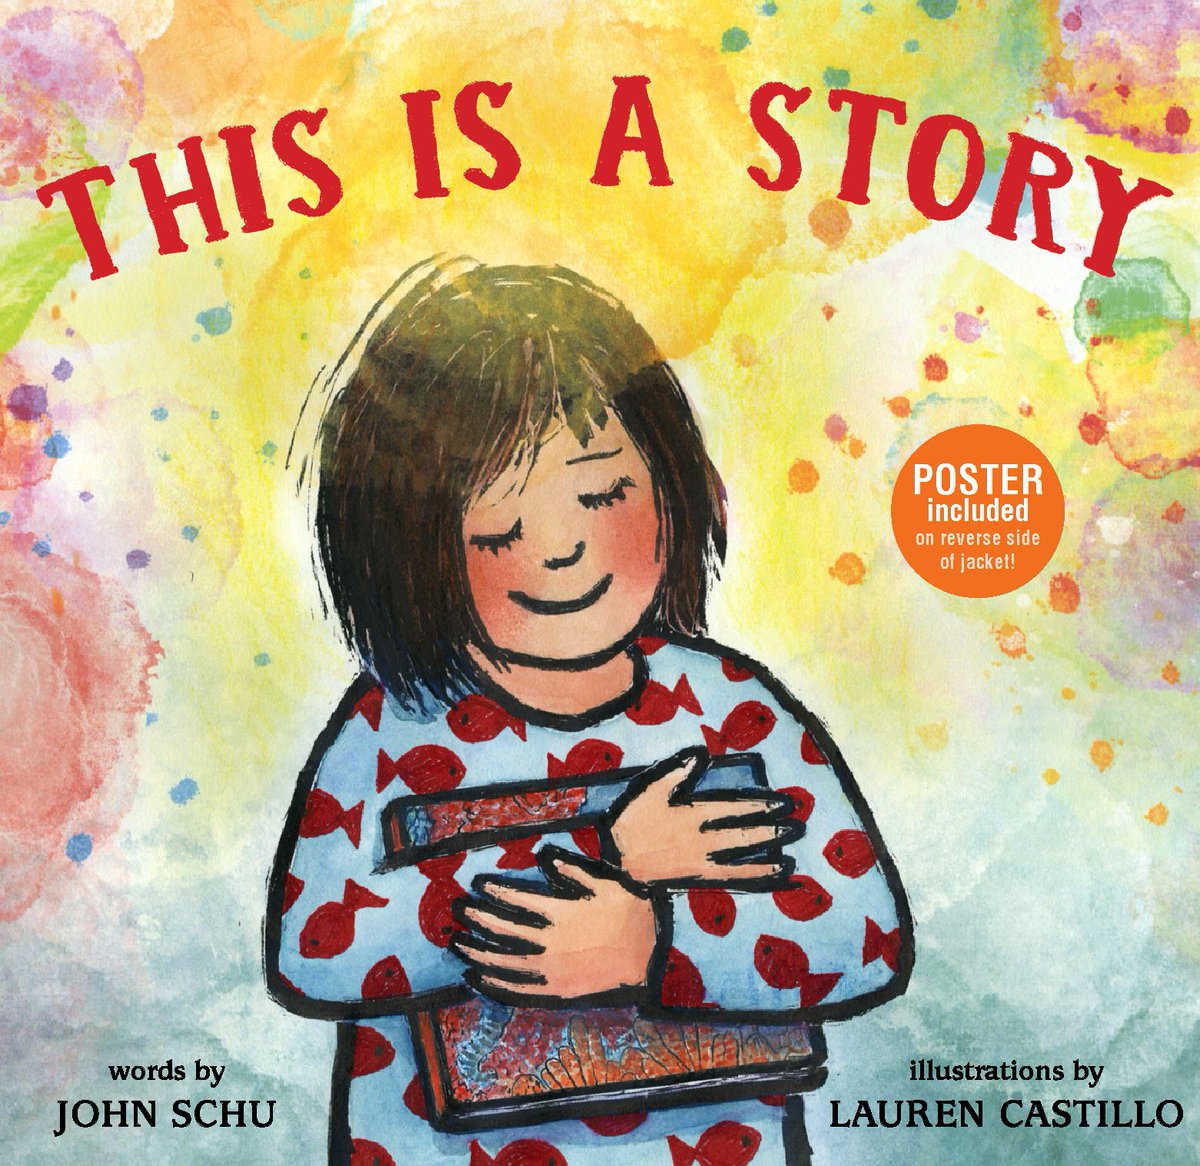 I'm overjoyed and grateful This Is a Story, illustrated by @studiocastillo and written by me, was included in the Bank Street College of Education's Best Children's Books of the Year 2024 Edition (for books published in 2023)! Thank you, @bankstreetedu! educate.bankstreet.edu/ccl/27/